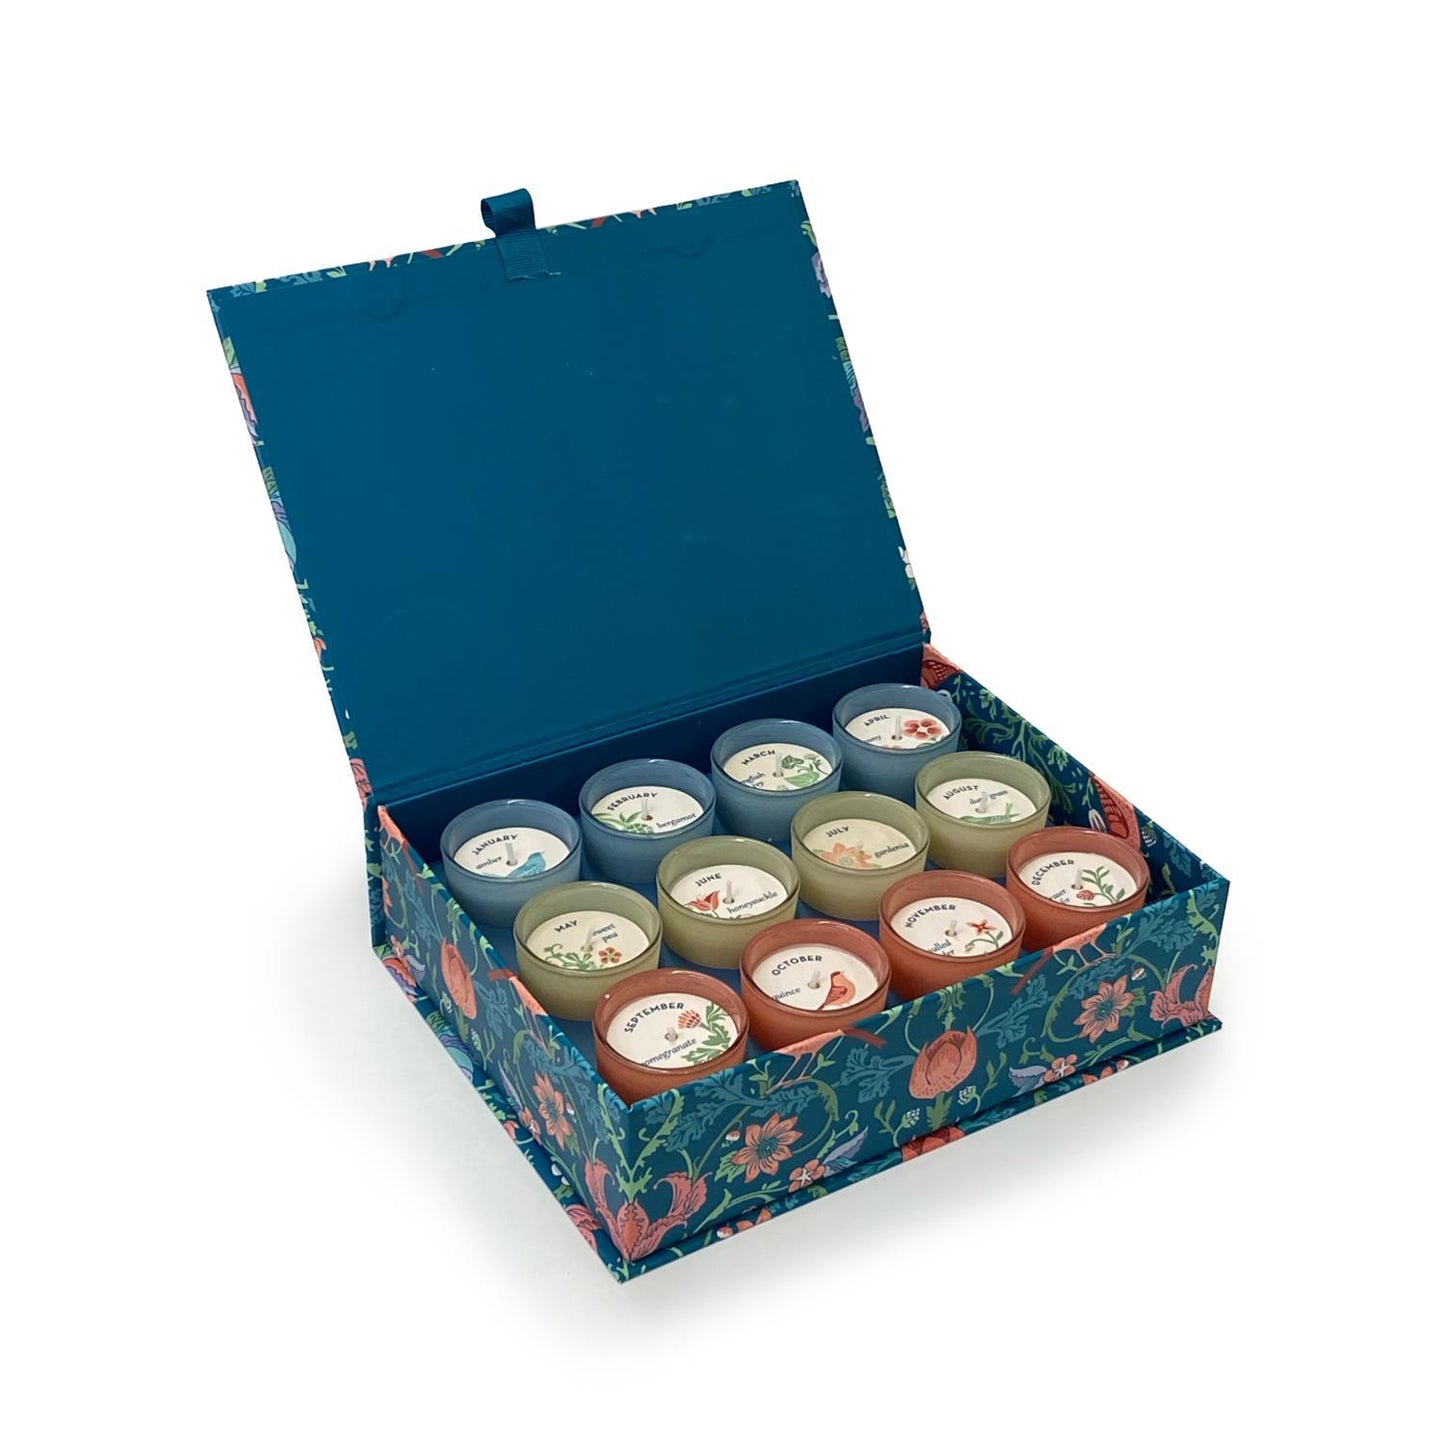 Year of Scents - Set of 12 Scented Candles in Gift Box